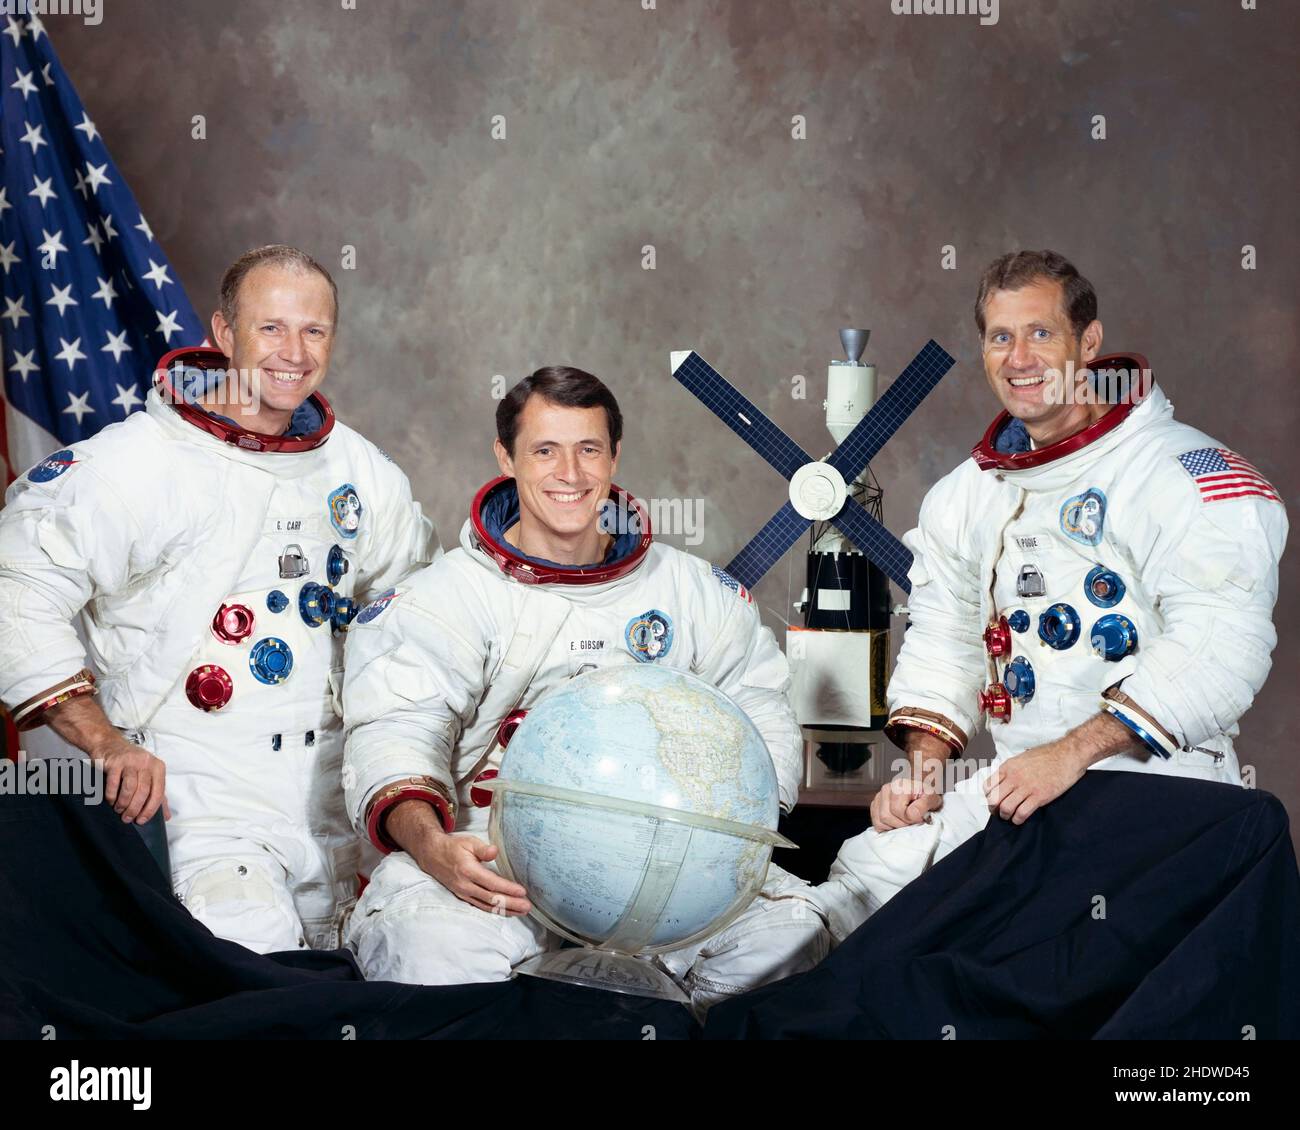 (August 1973) --- These three men are the prime crew for the Skylab 4 mission. Pictured in their Skylab spacesuits with a globe and a model of the Skylab space station are, left to right, astronaut Gerald P. Carr, commander; scientist-astronaut Edward G. Gibson, science pilot; and astronaut William R. Pogue, pilot Stock Photo